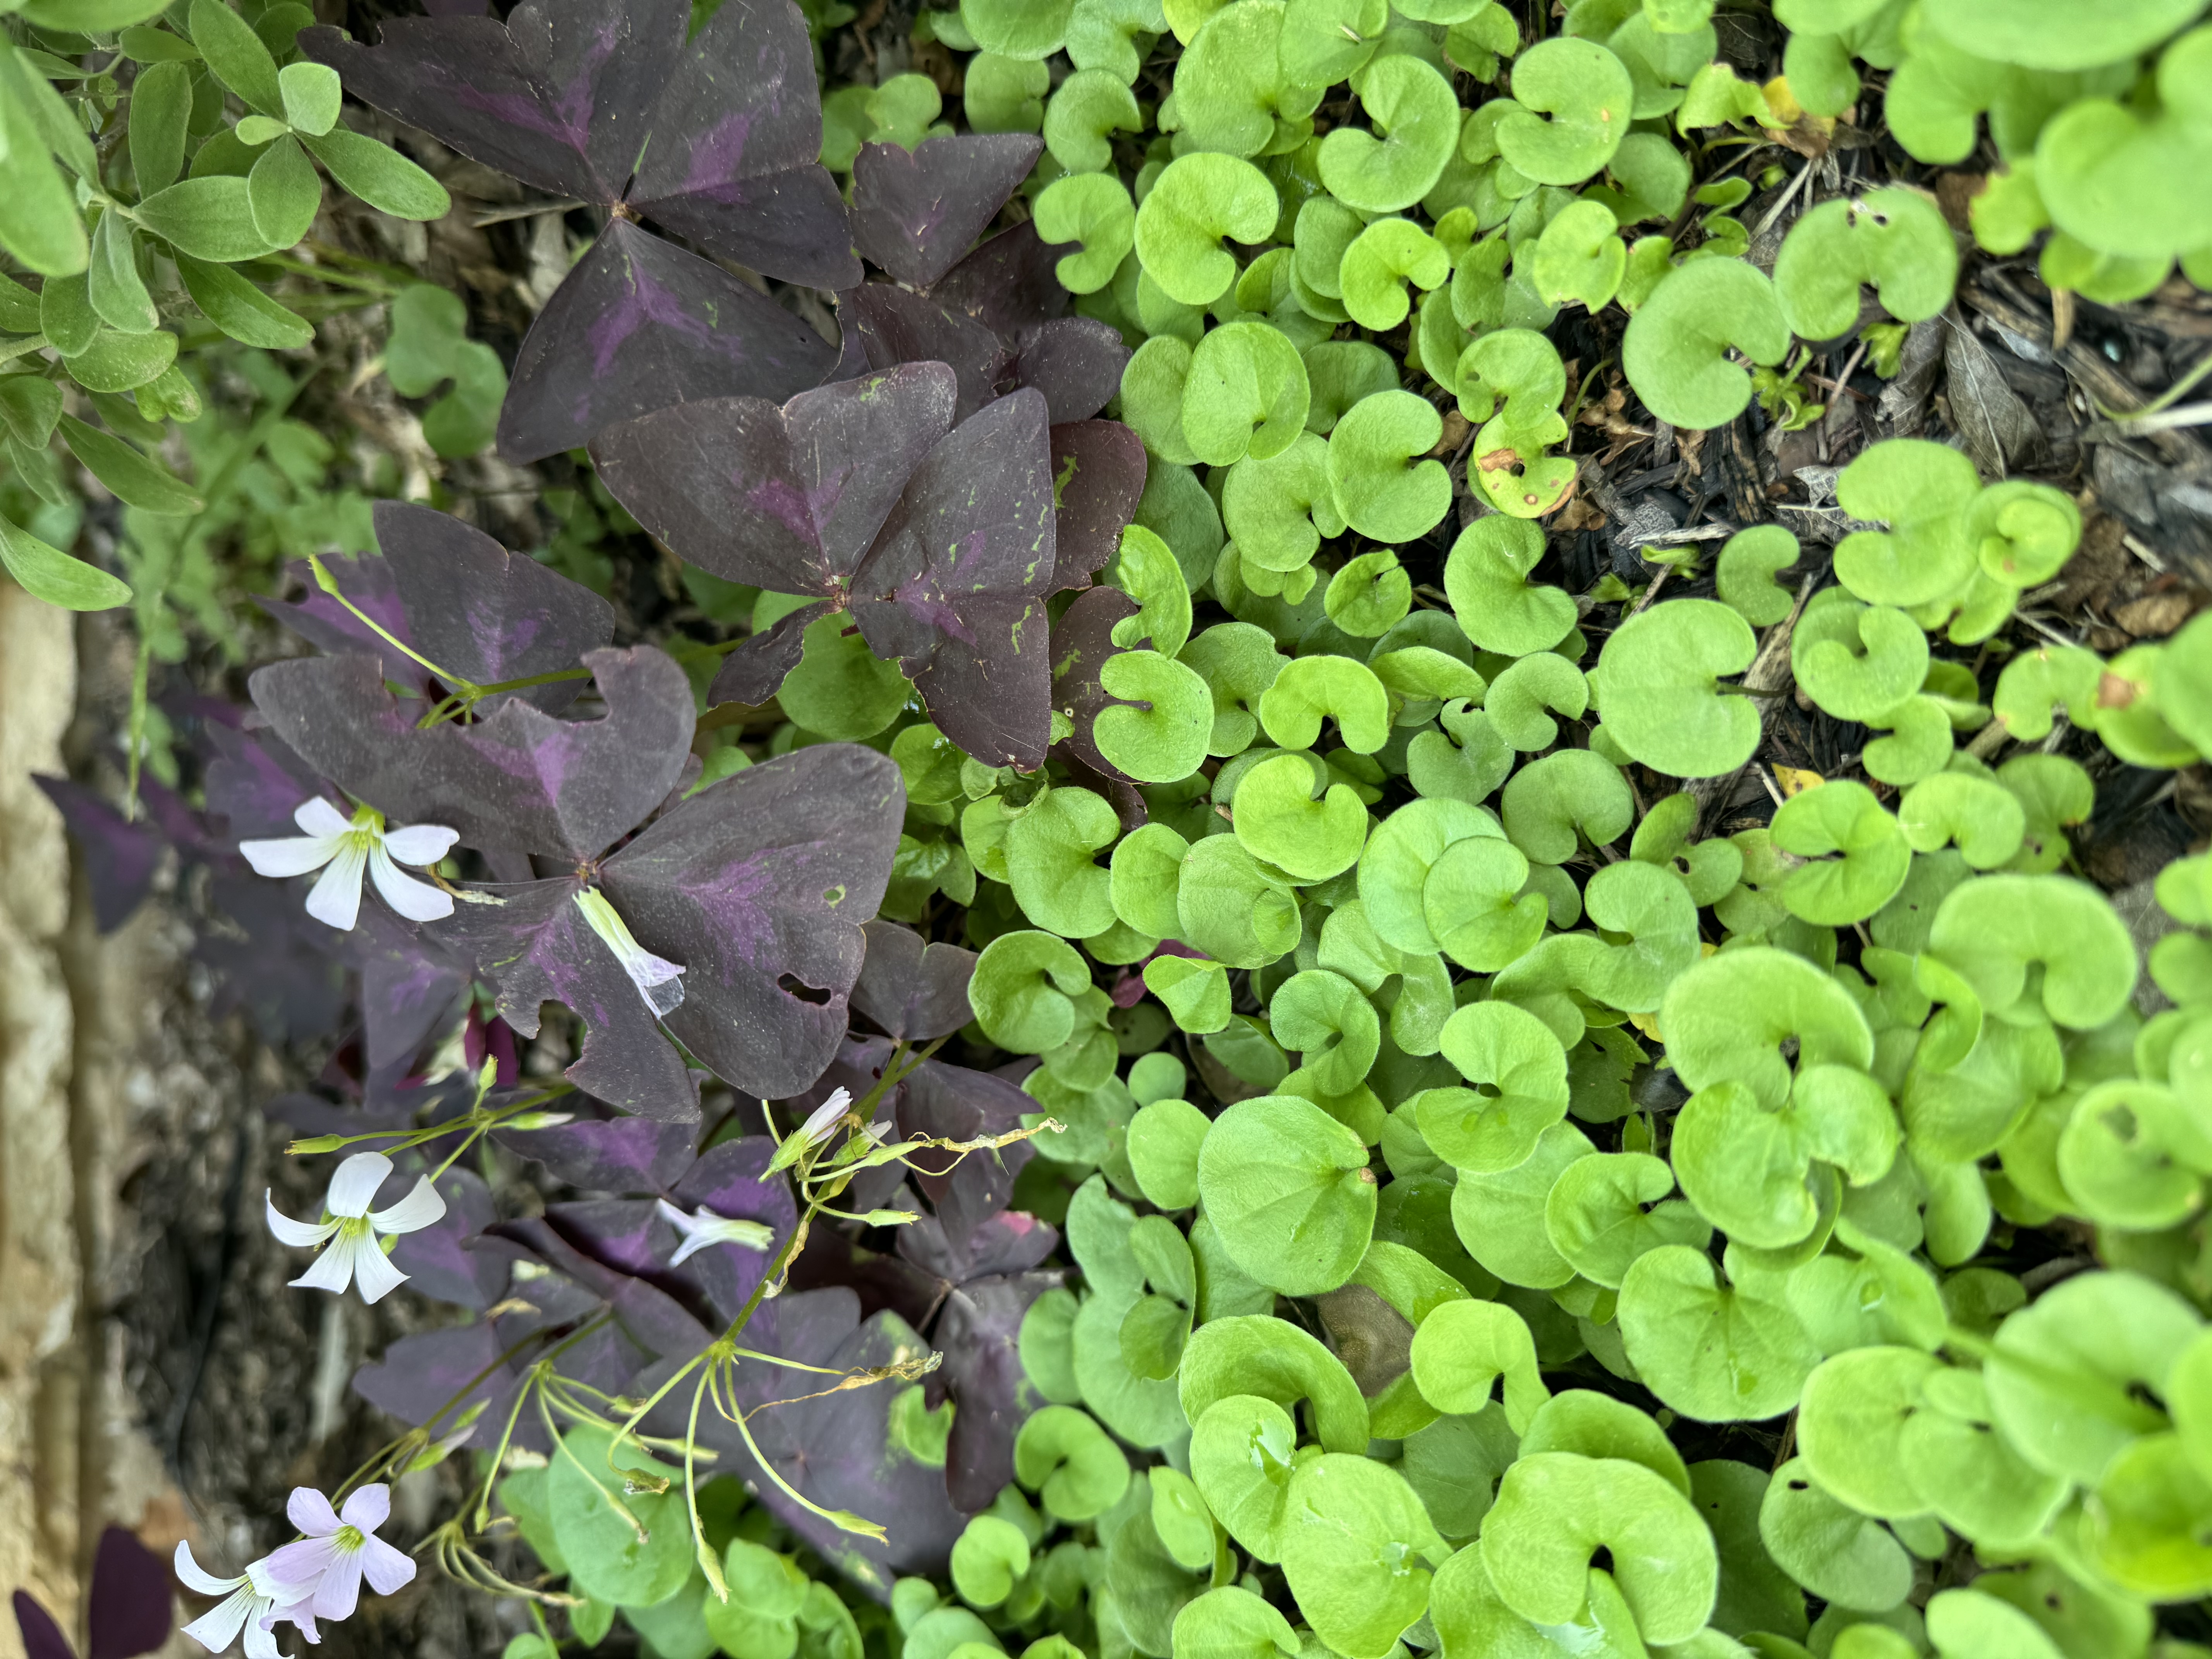 A close-up image showcases a micro-ecosystem with purple-leaved Oxalis triangularis, displaying delicate white flowers, intermingled with a vibrant green ground cover of small, round leaves. The rich colors and varied textures illustrate a small-scale example of urban biodiversity.